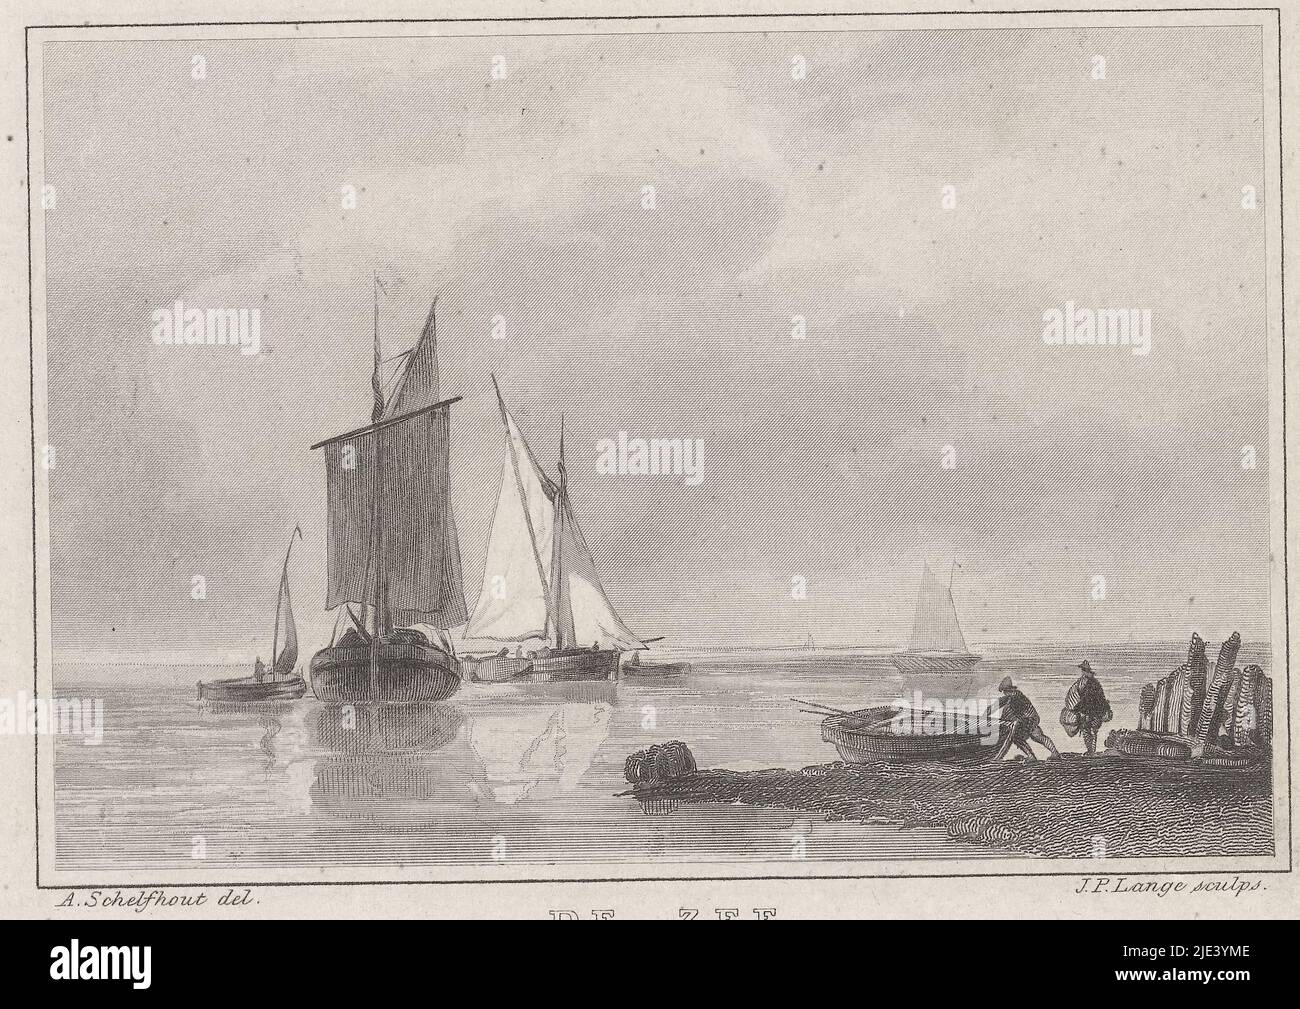 Seascape with sailing ships, Johannes Philippus Lange, after Andreas Schelfhout, 1820 - 1849, Seascape with sailing ships,. On the right, a figure pushes a rowboat from the beach into the water., print maker: Johannes Philippus Lange, (mentioned on object), intermediary draughtsman: Andreas Schelfhout, (mentioned on object), 1820 - 1849, paper, steel engraving, h 123 mm - w 137 mm Stock Photo